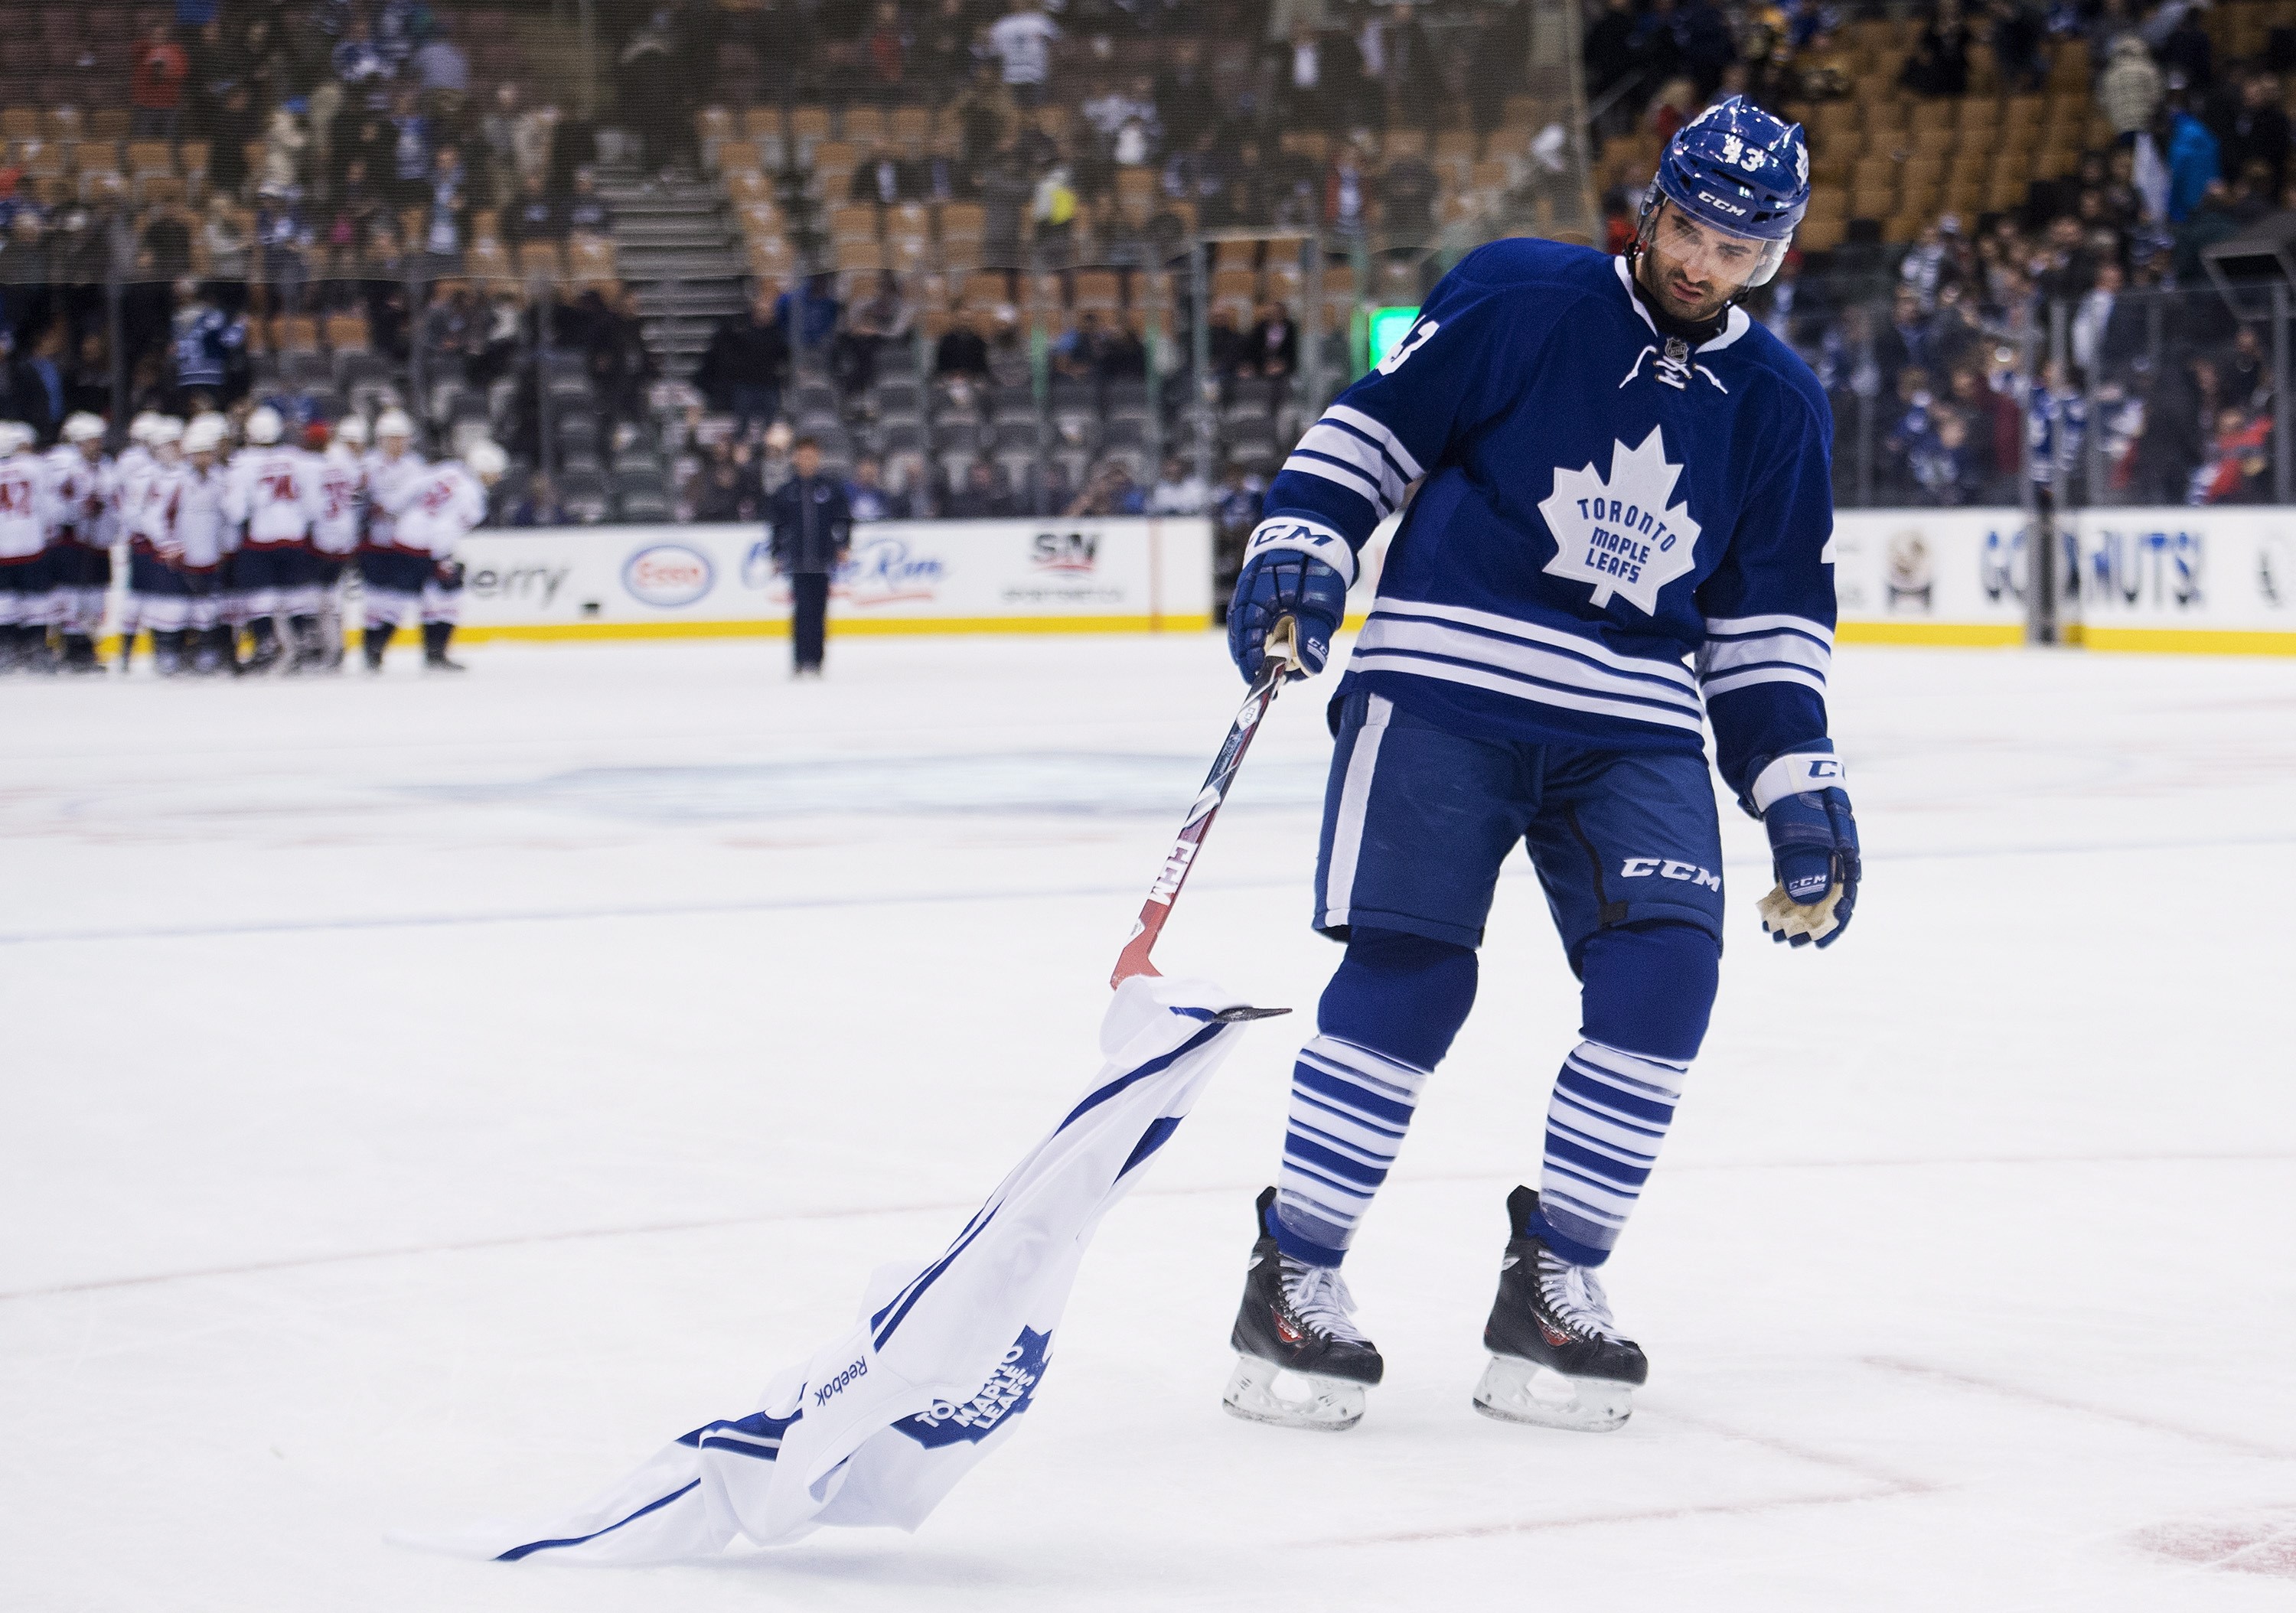 Toronto Maple Leafs forward Nazem Kadri picks up a Maple Leafs jersey on the ice after being defeated buy the Washington Capitals during third period NHL hockey action in Toronto on Wednesday, January 7, 2015. THE CANADIAN PRESS/Nathan Denette